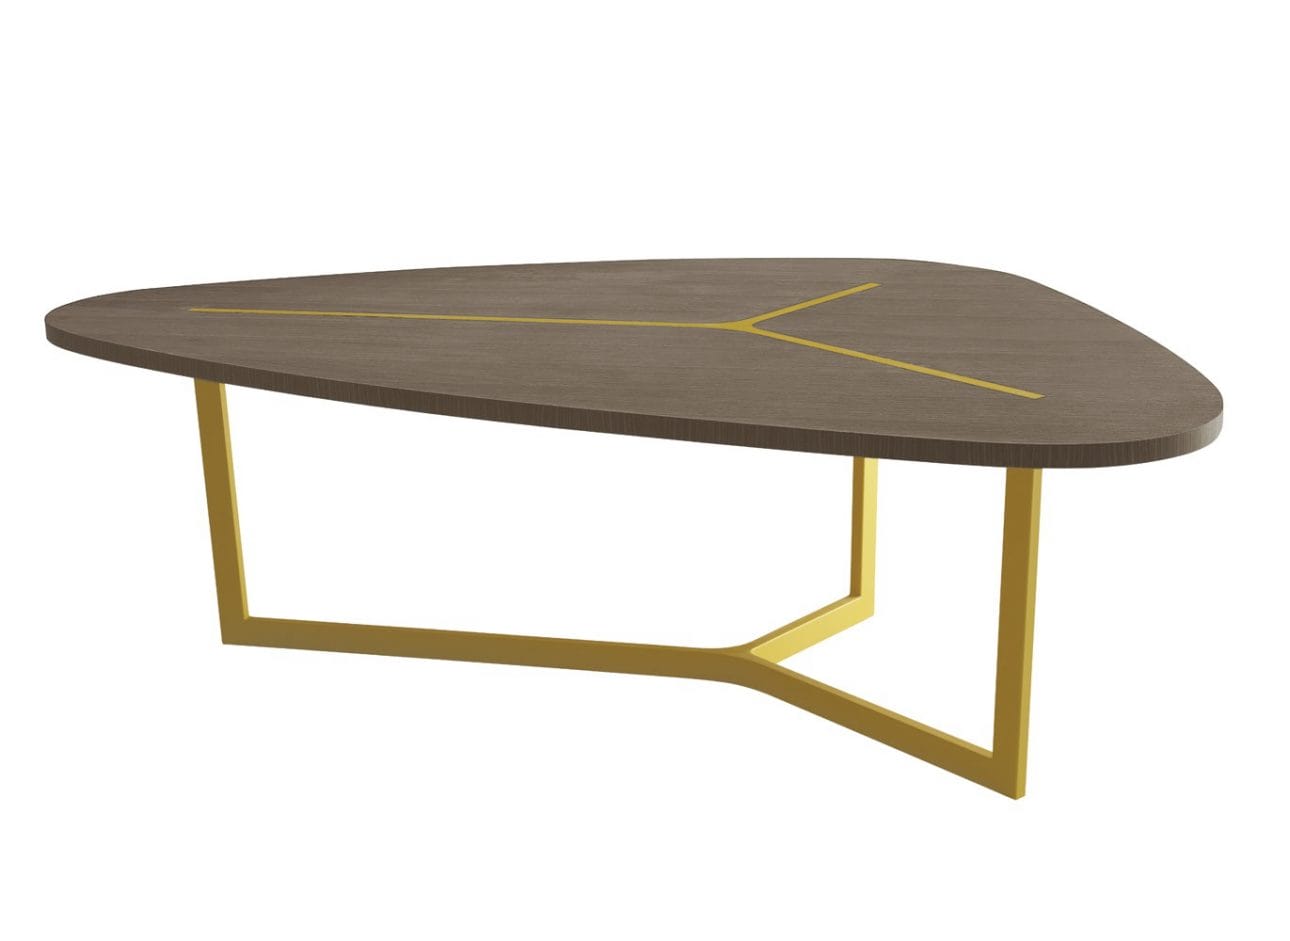 Triangle Dining Table with Yellow Accents